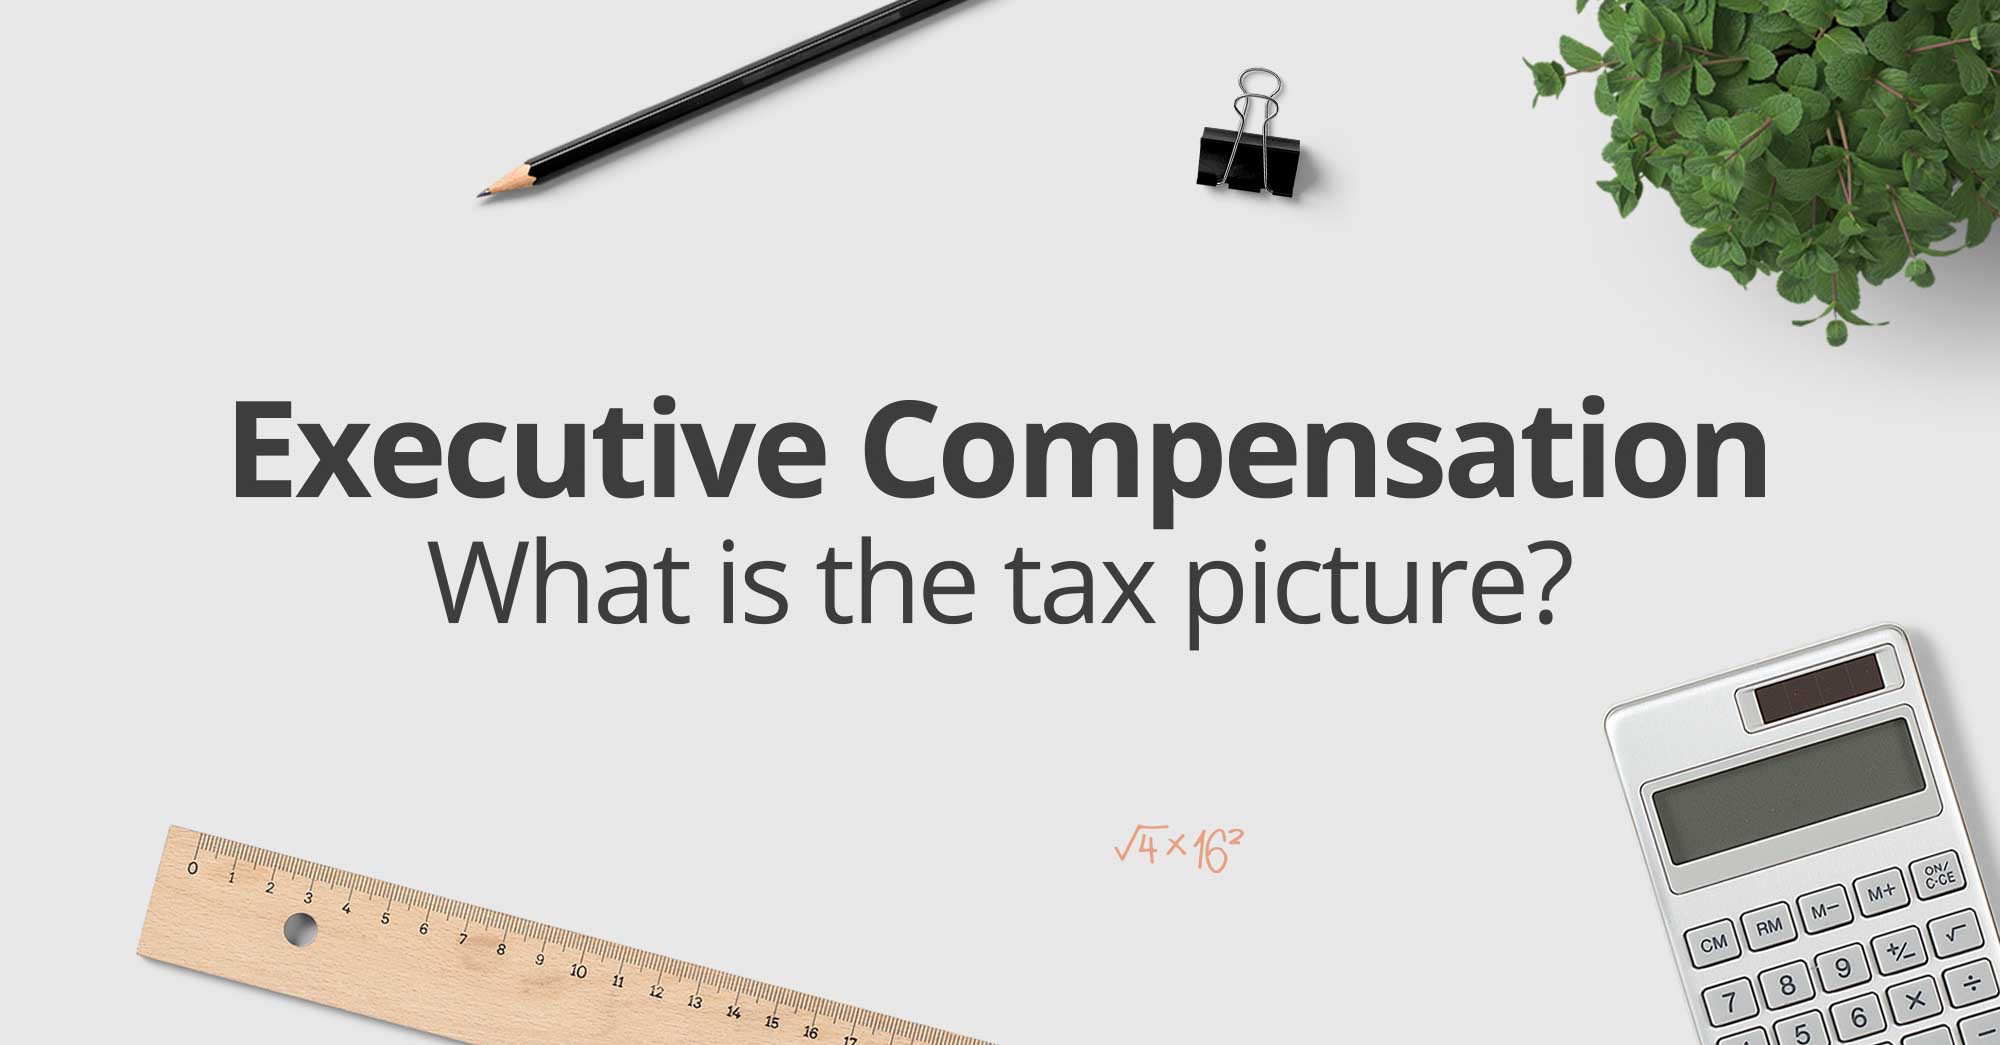 Executive Compensation: What is the tax picture?